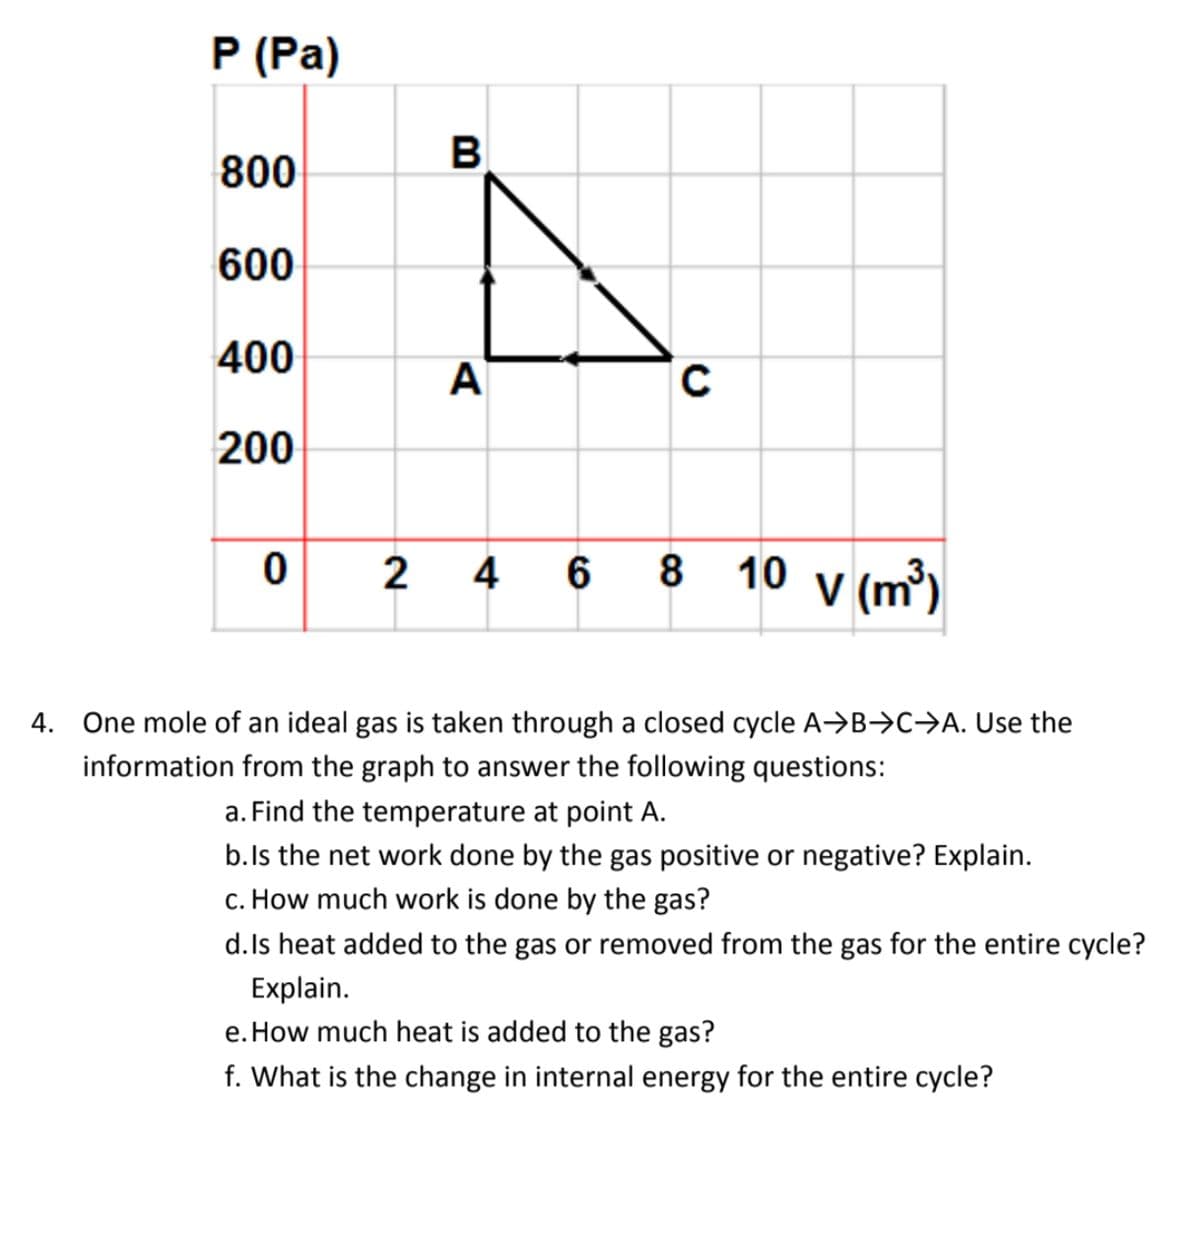 P (Pa)
B
800
600
400
A
C
200
2
8 10 v (m³)
4. One mole of an ideal gas is taken through a closed cycle A→B→C→A. Use the
information from the graph to answer the following questions:
a. Find the temperature at point A.
b.ls the net work done by the gas positive or negative? Explain.
c. How much work is done by the gas?
d.Is heat added to the gas or removed from the gas for the entire cycle?
Explain.
e. How much heat is added to the gas?
f. What is the change in internal energy for the entire cycle?
4,
